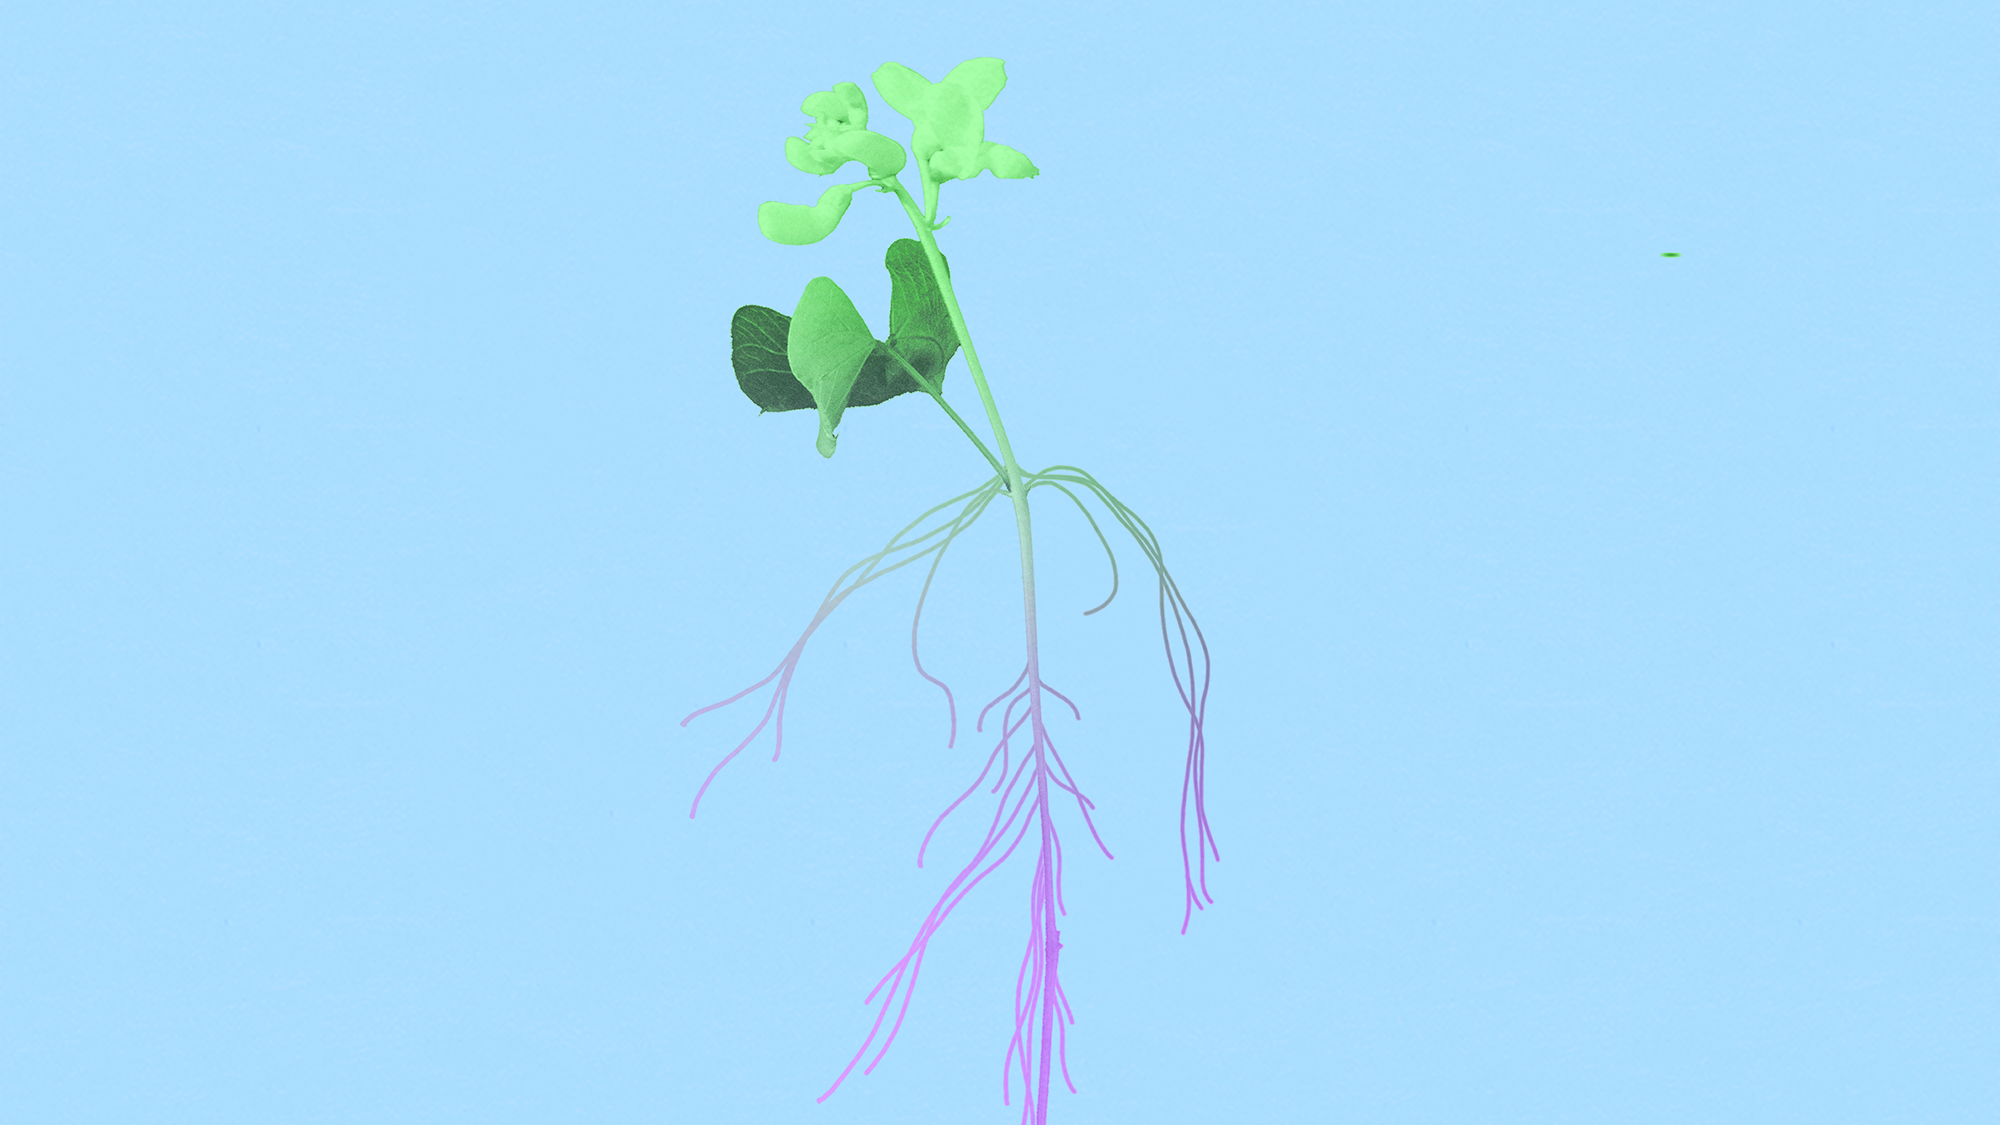 An illustration of a plant with central nervous system like tendrils coming out of the stem.